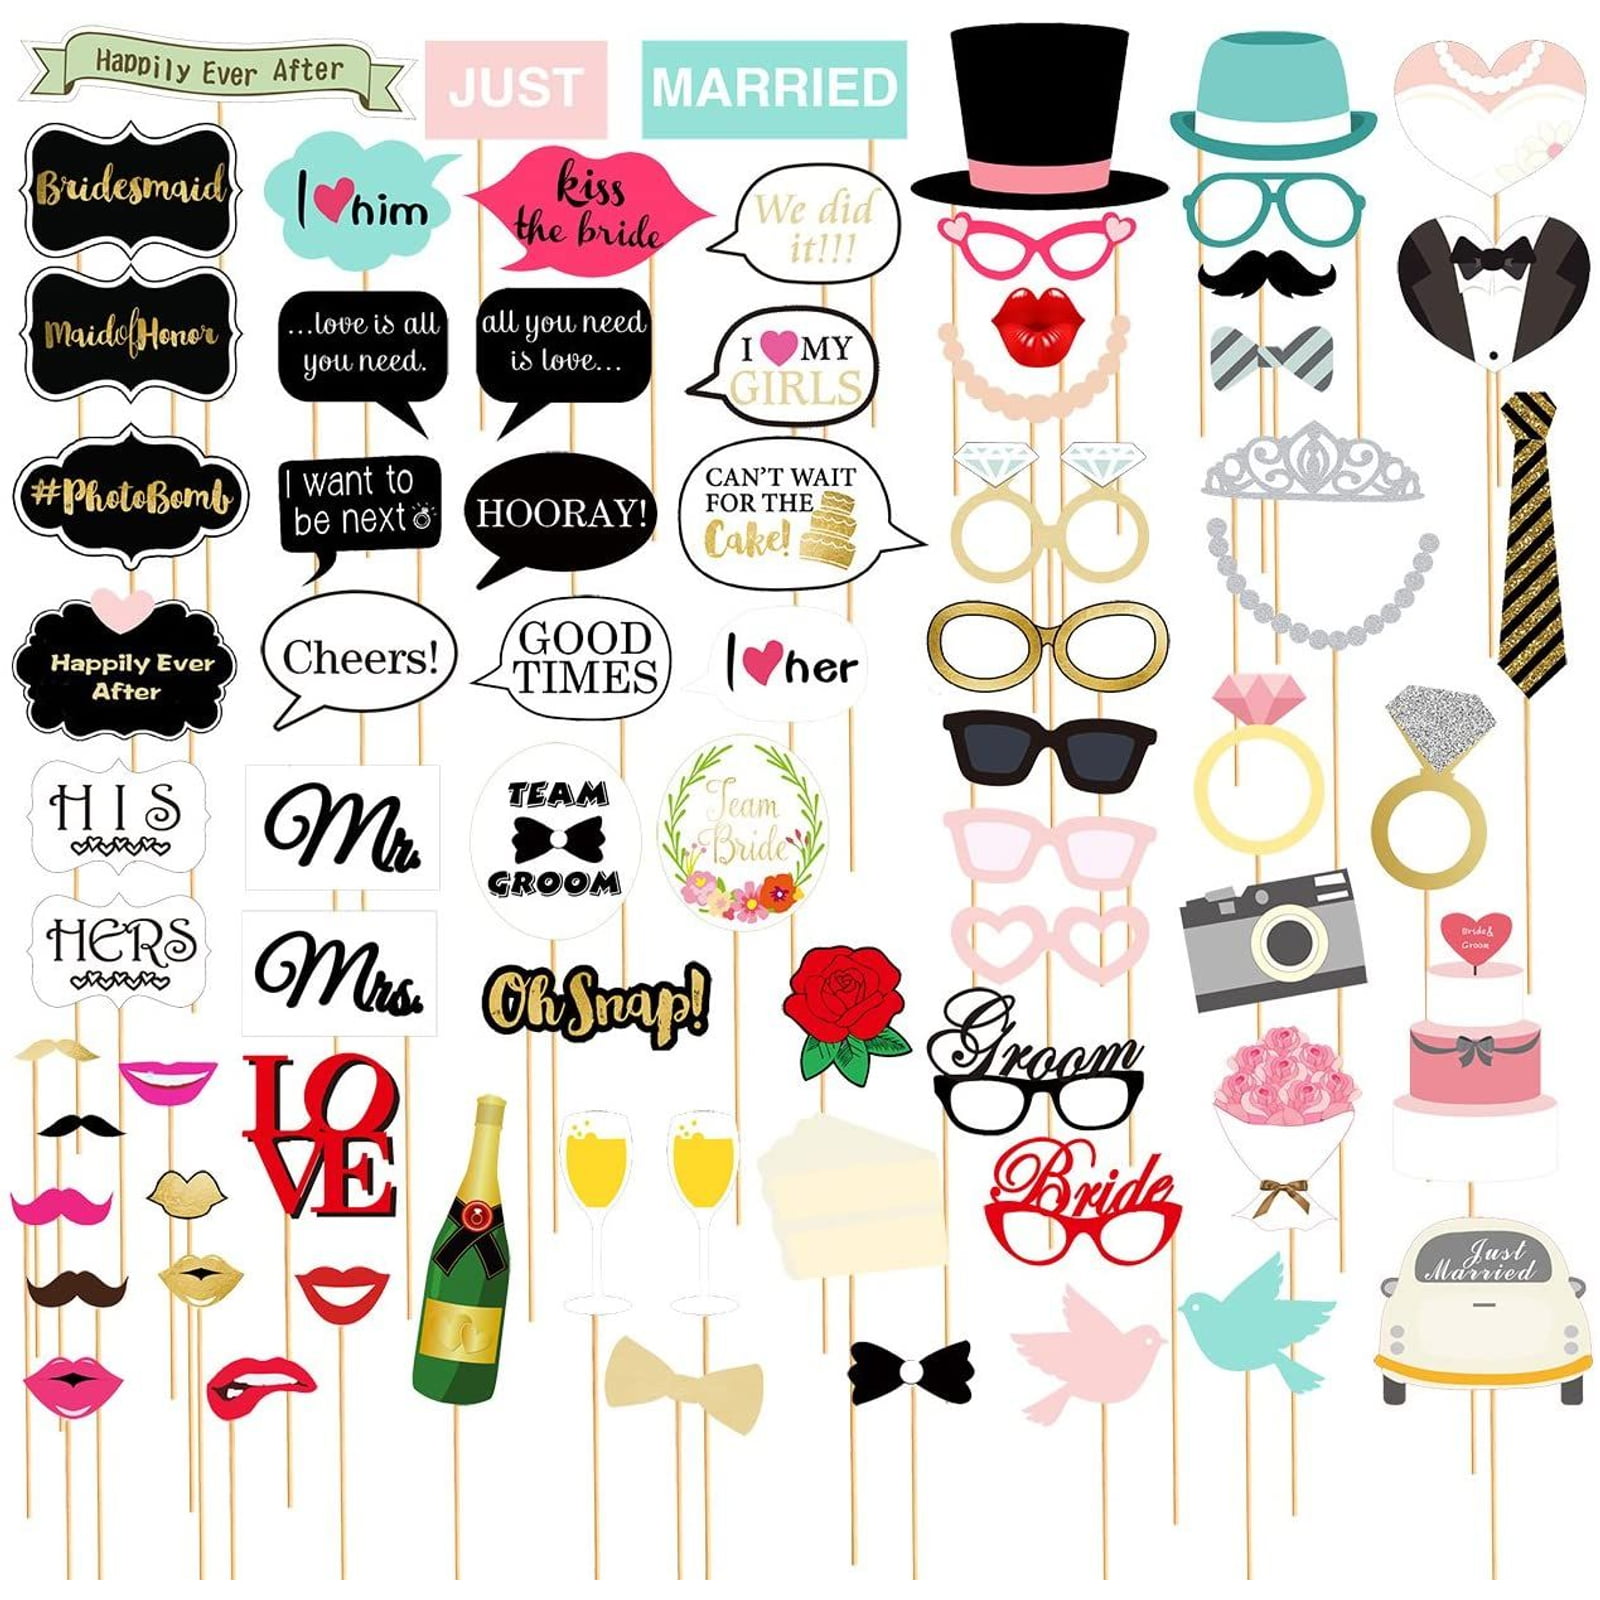 20pcs Photo Booth Props On a Stick Frame Wedding Party Hen Night Background 